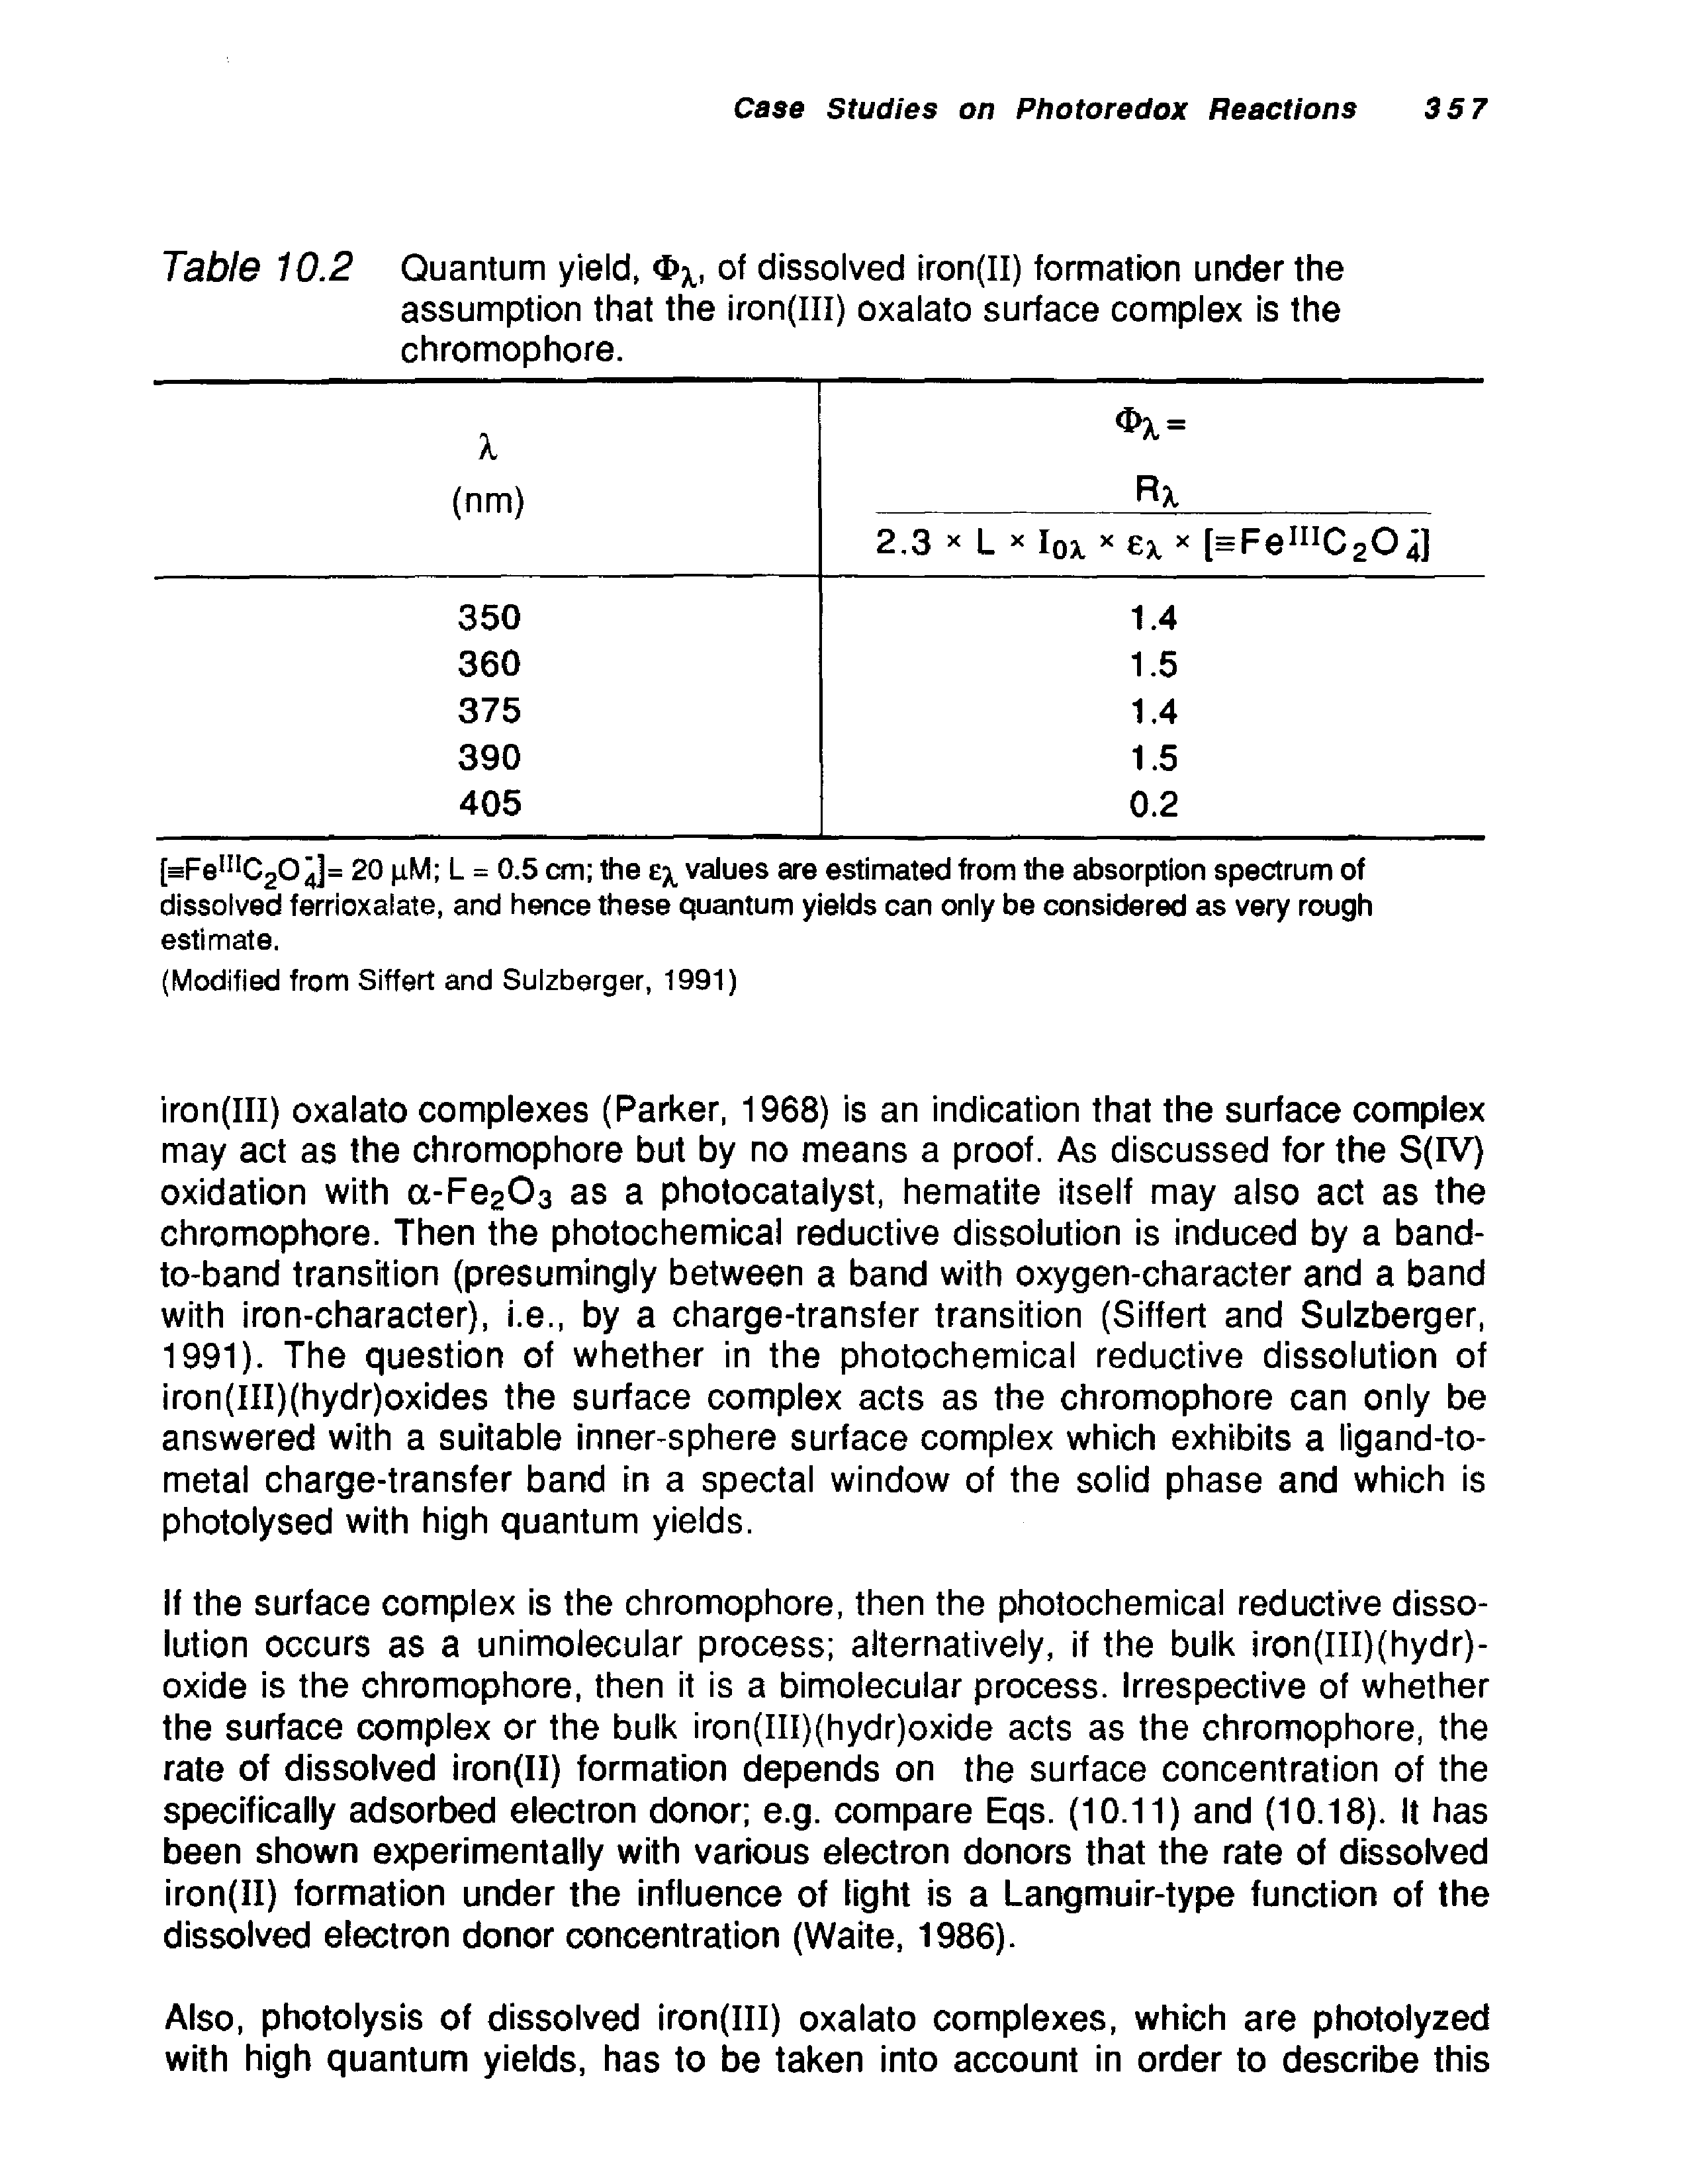 Table 10.2 Quantum yield, of dissolved iron(II) formation under the assumption that the iron(lll) oxalato surface complex is the chromophore.